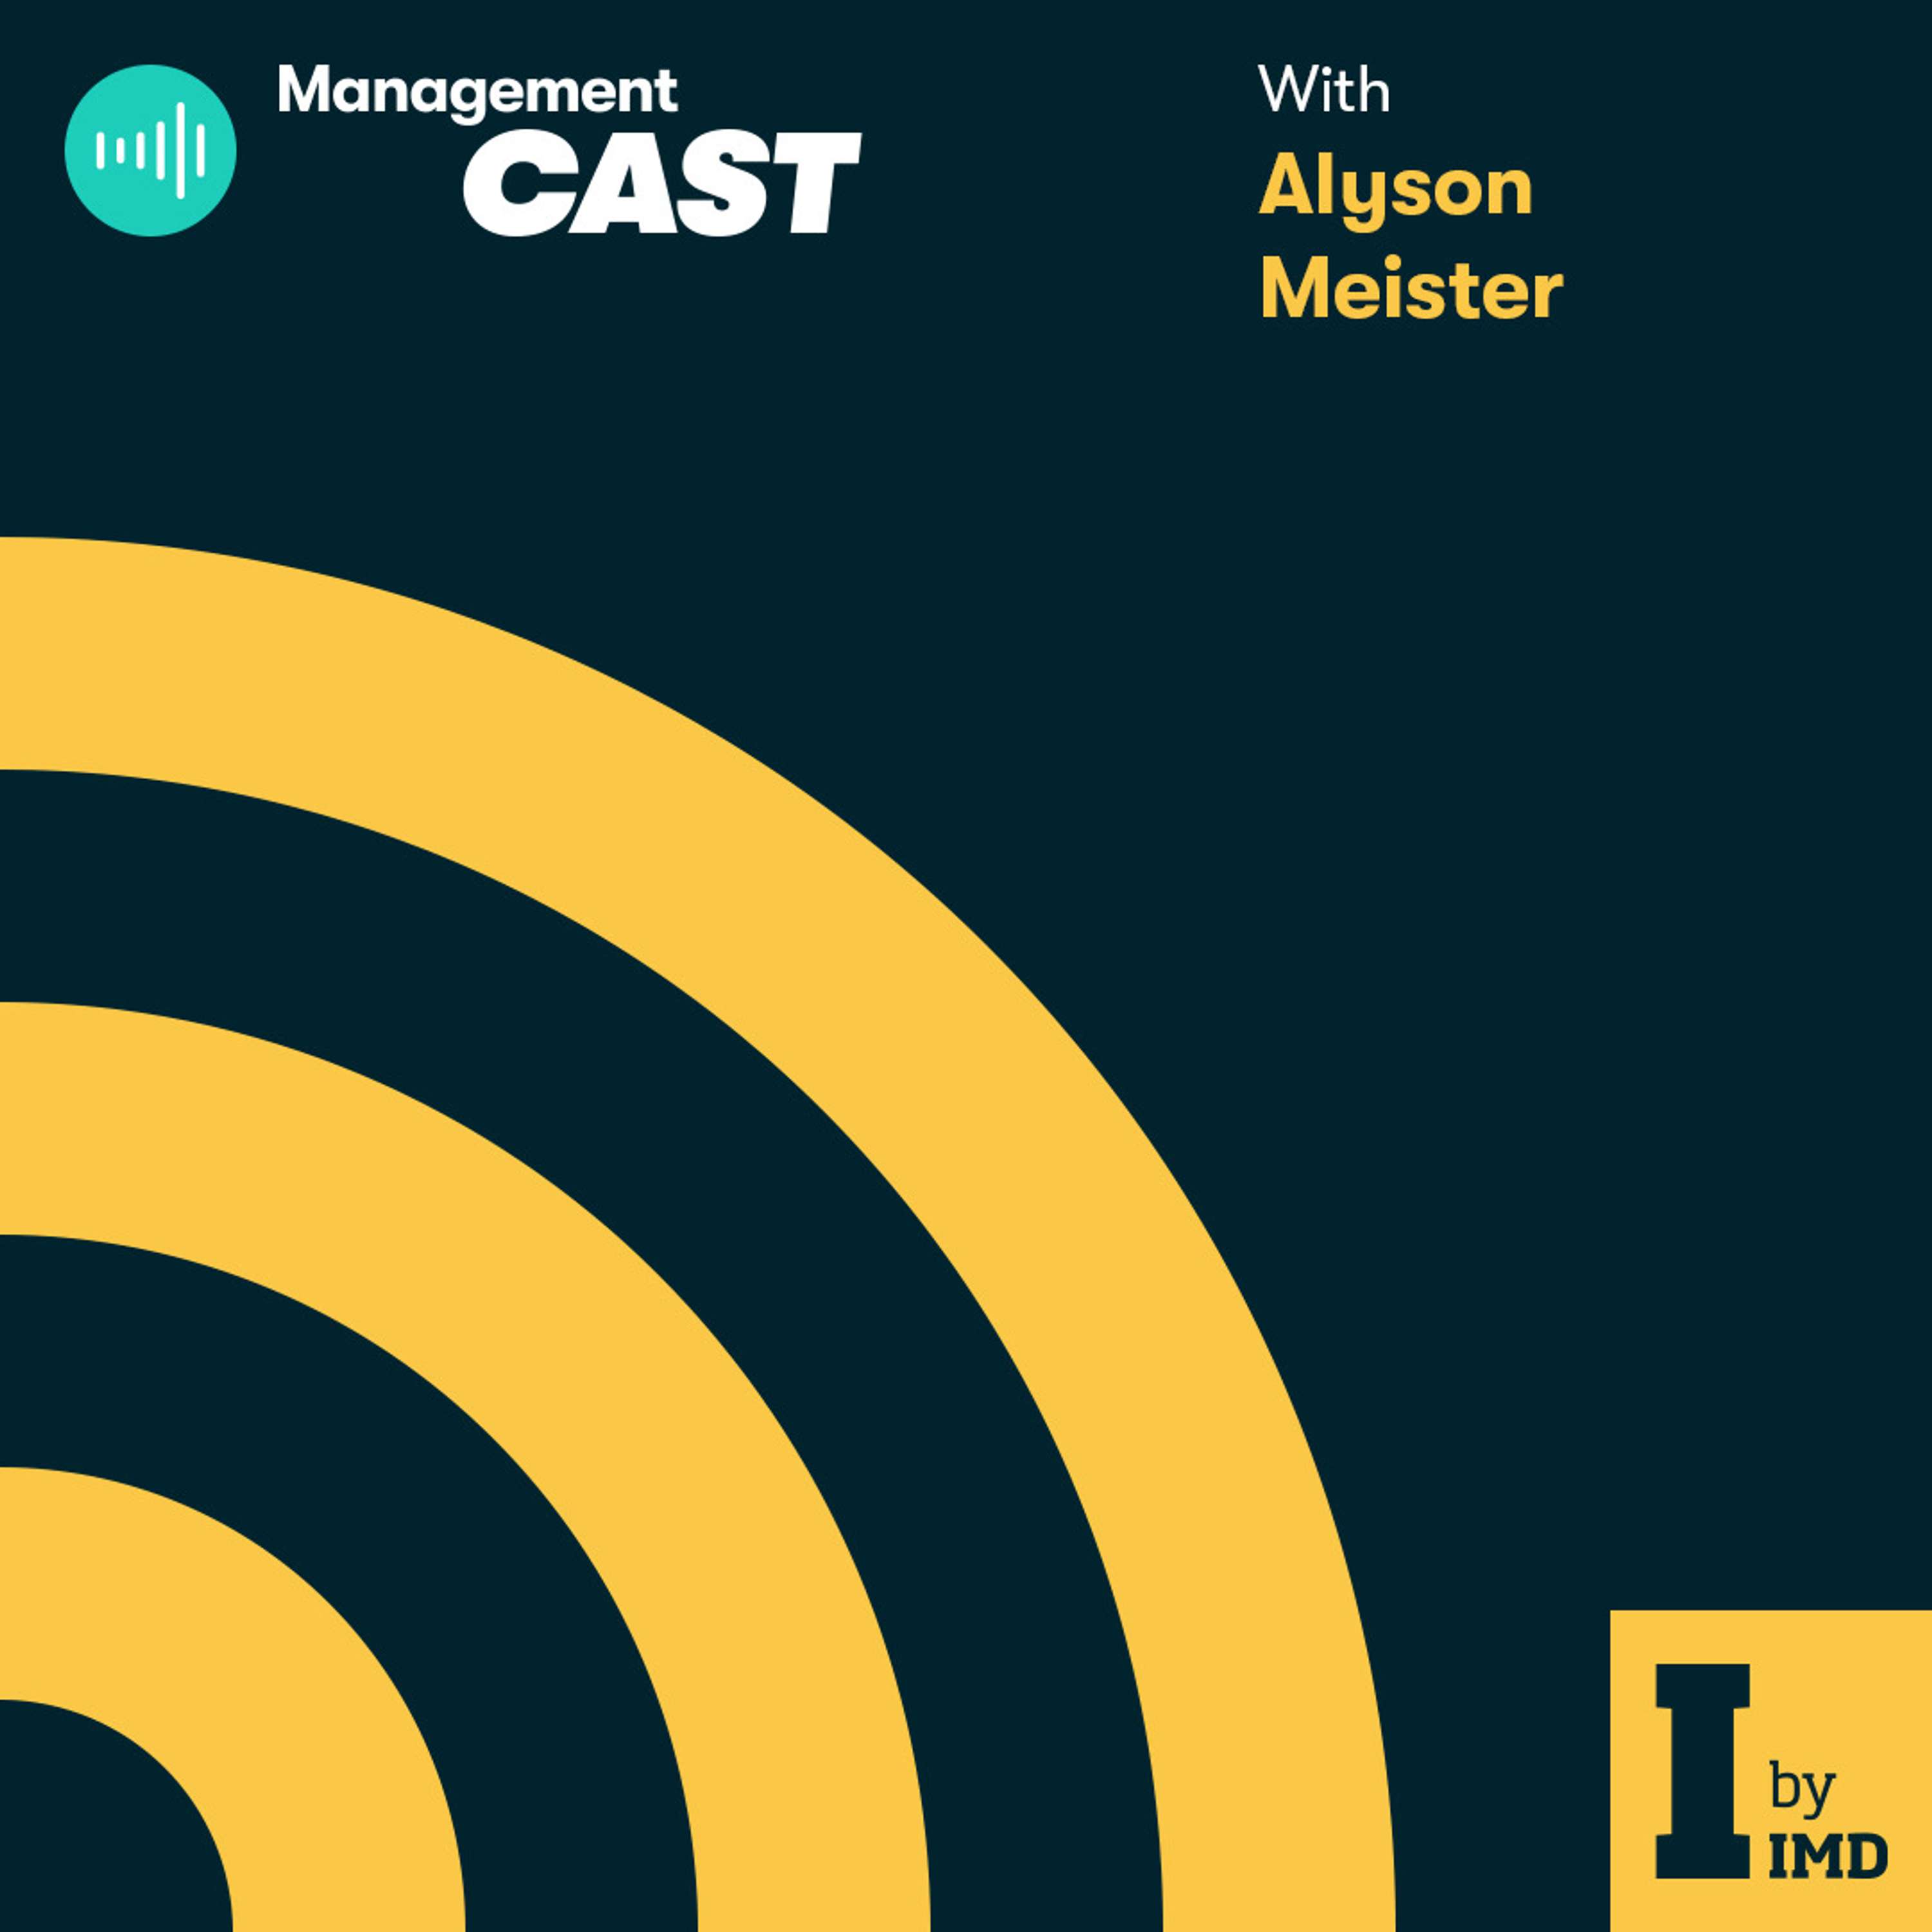 How to build a better workplace, with Alyson Meister